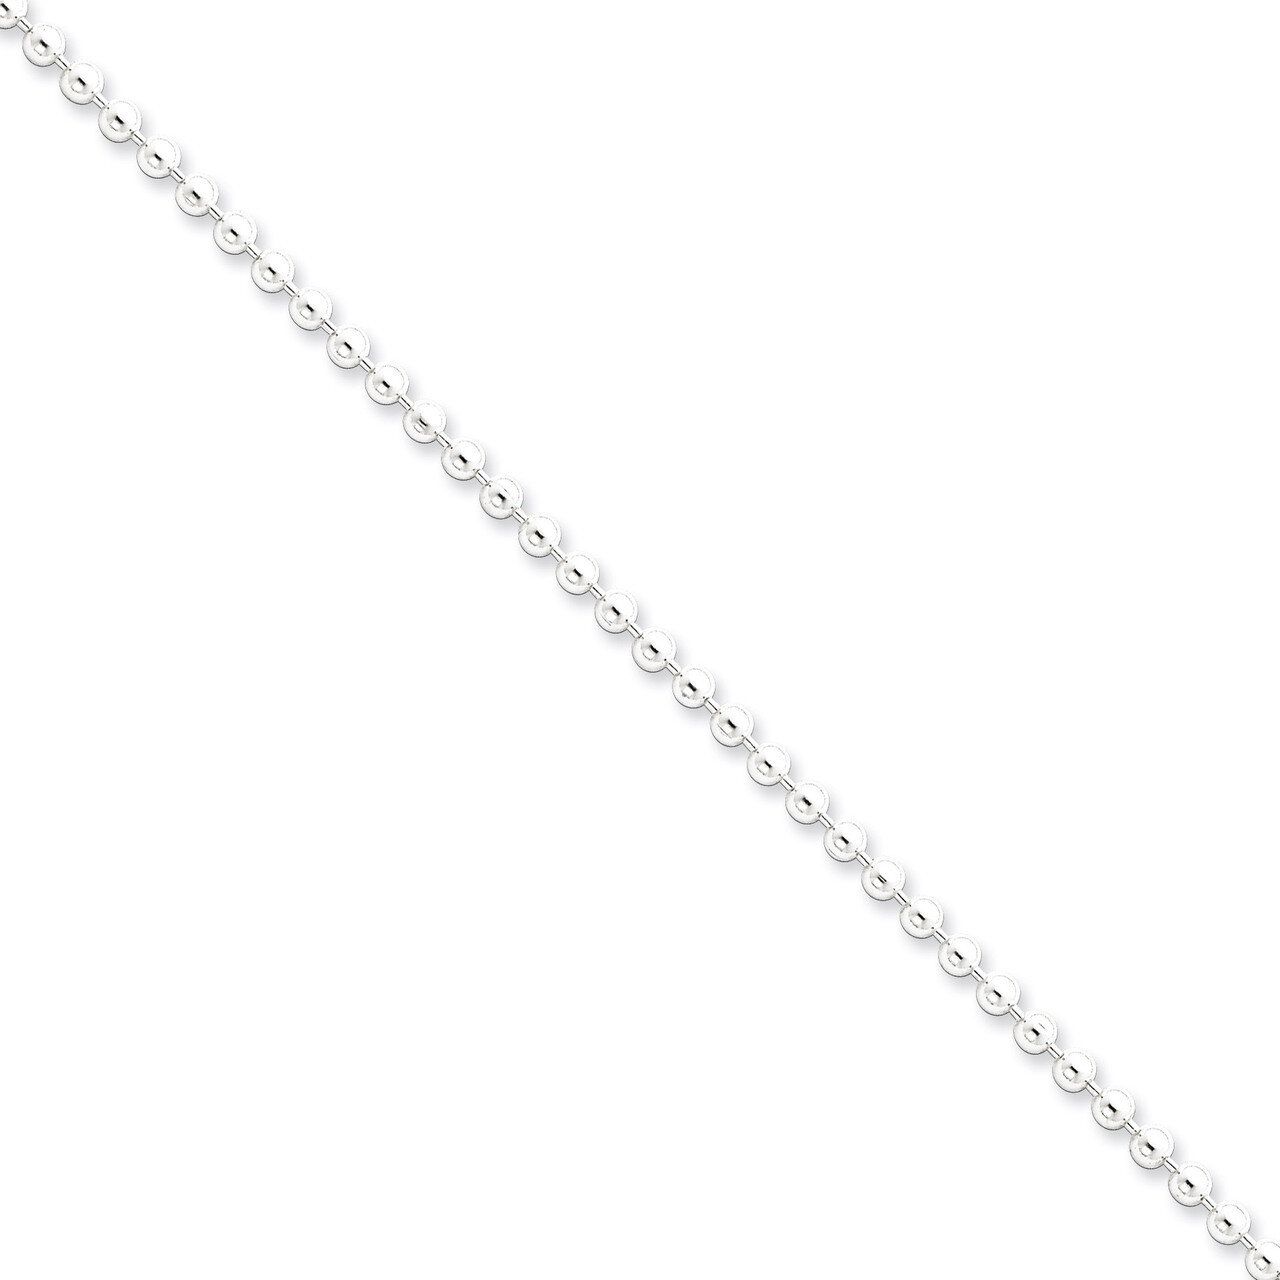 16 Inch 3mm Beaded Chain Sterling Silver QK83-16